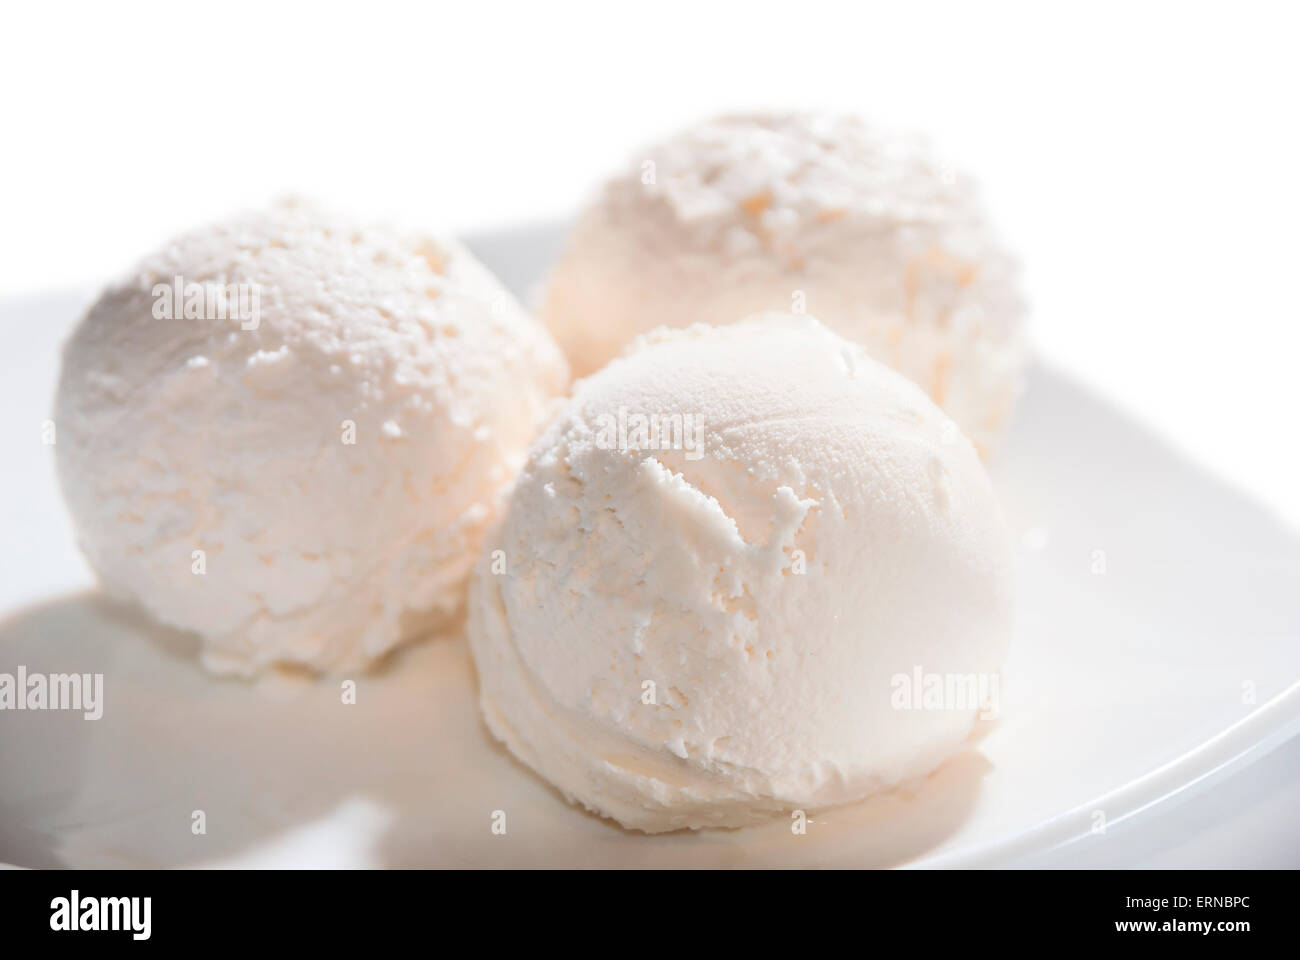 three balls of ice cream on a plate isolated Stock Photo